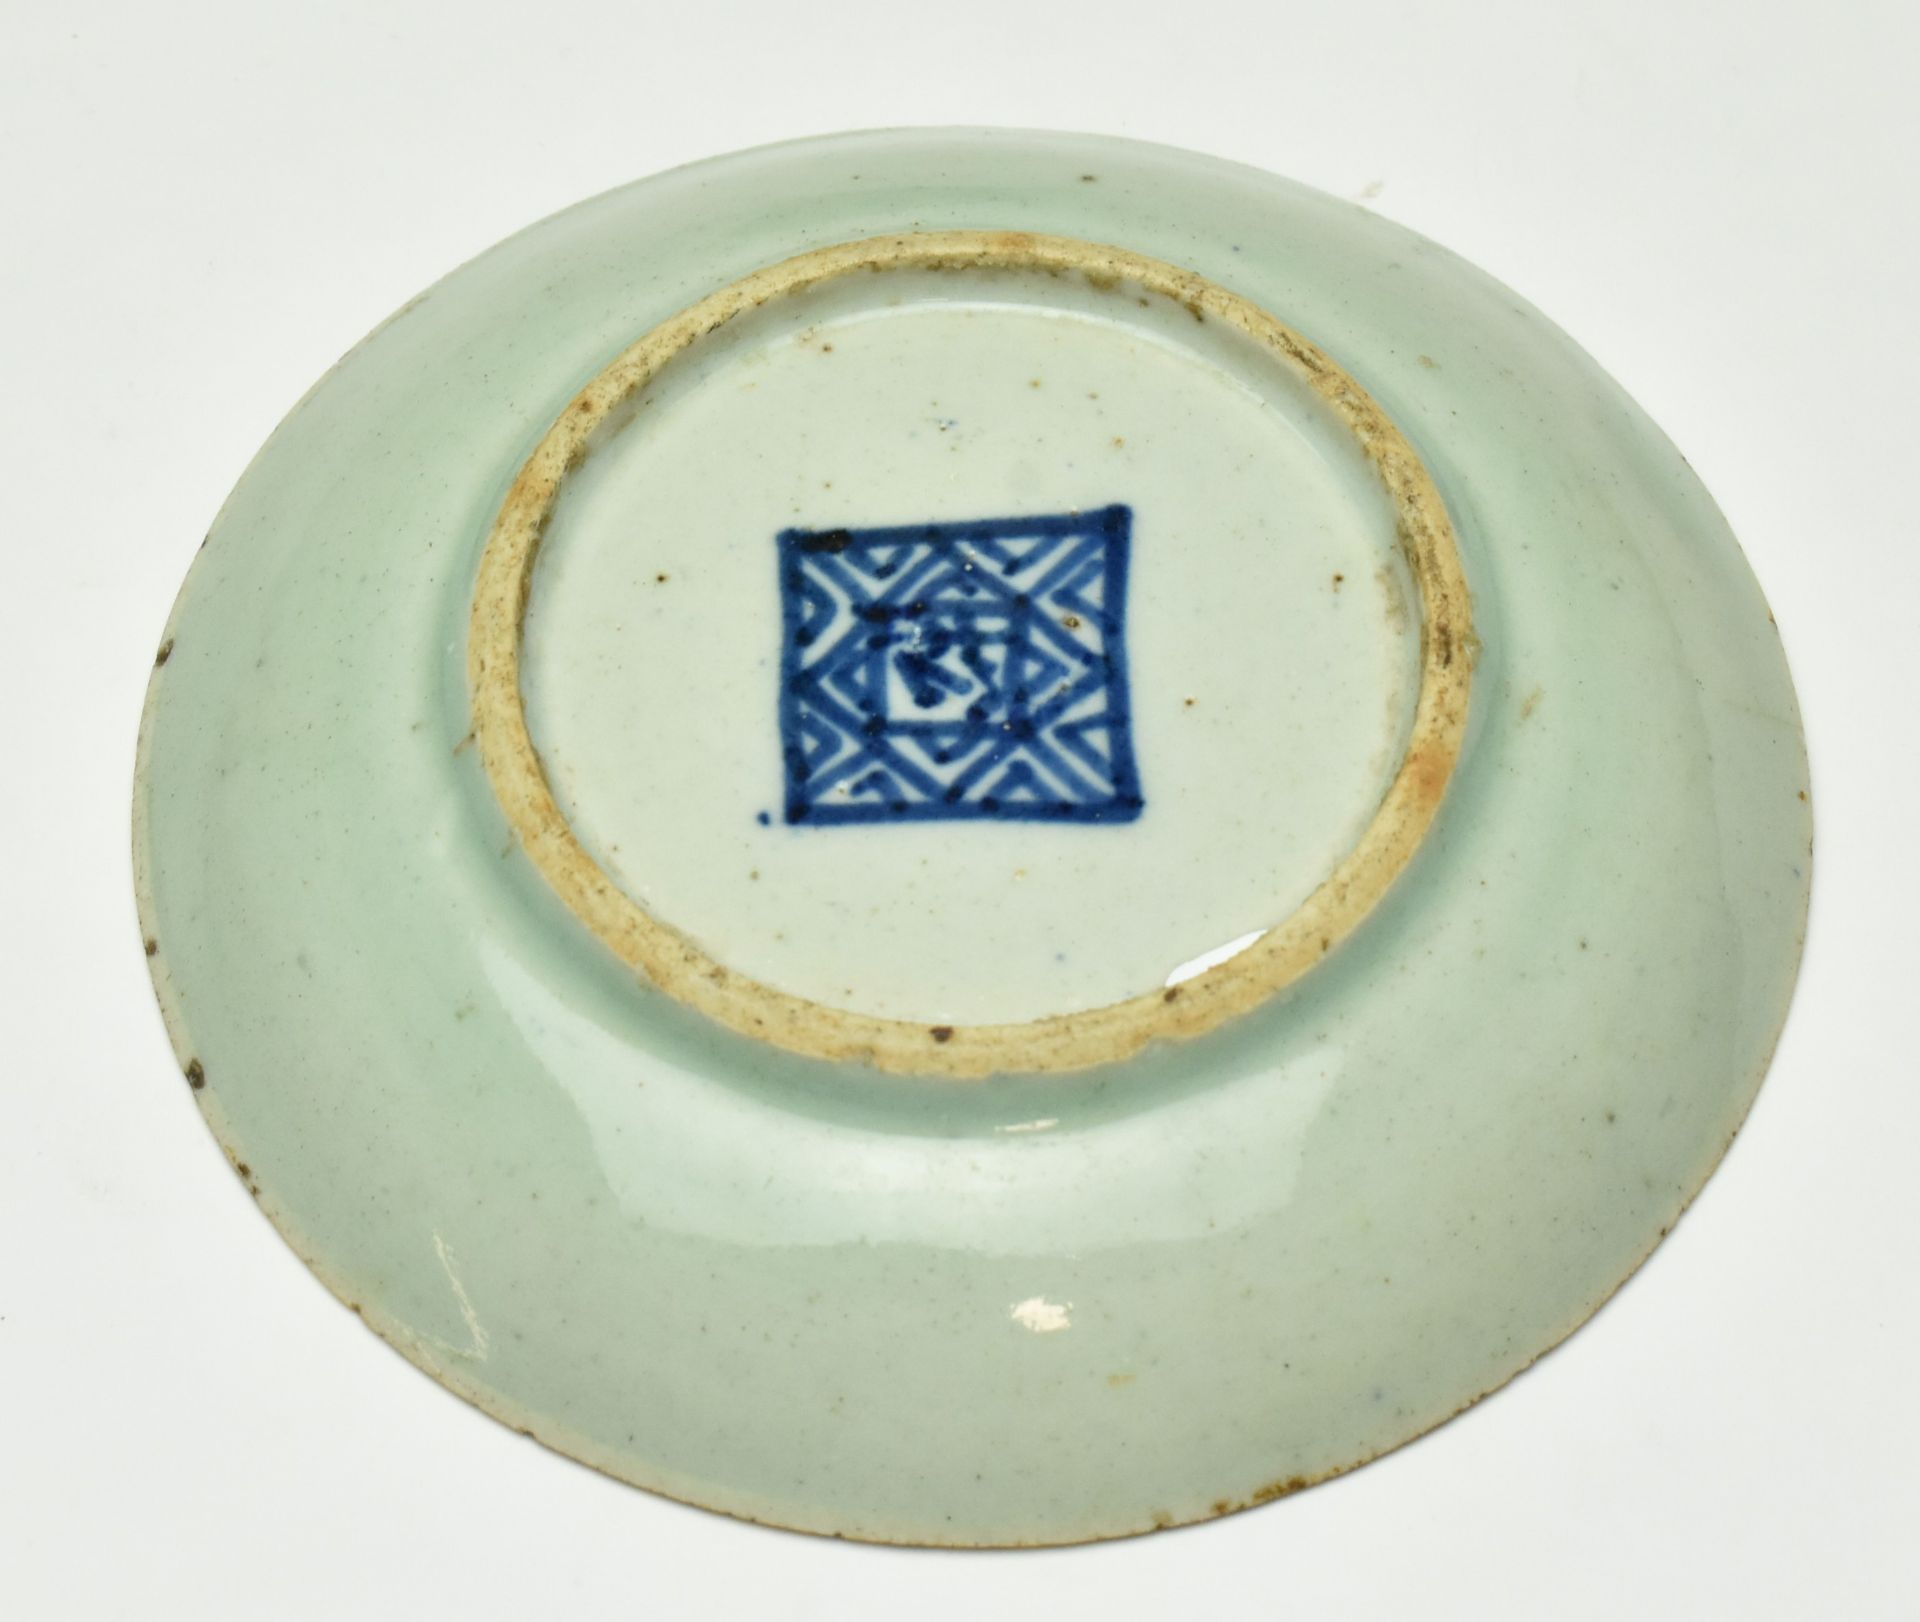 TWO QING DYNASTY CELADON GLAZED DISHES 清 青釉 盘子两个 - Image 4 of 7